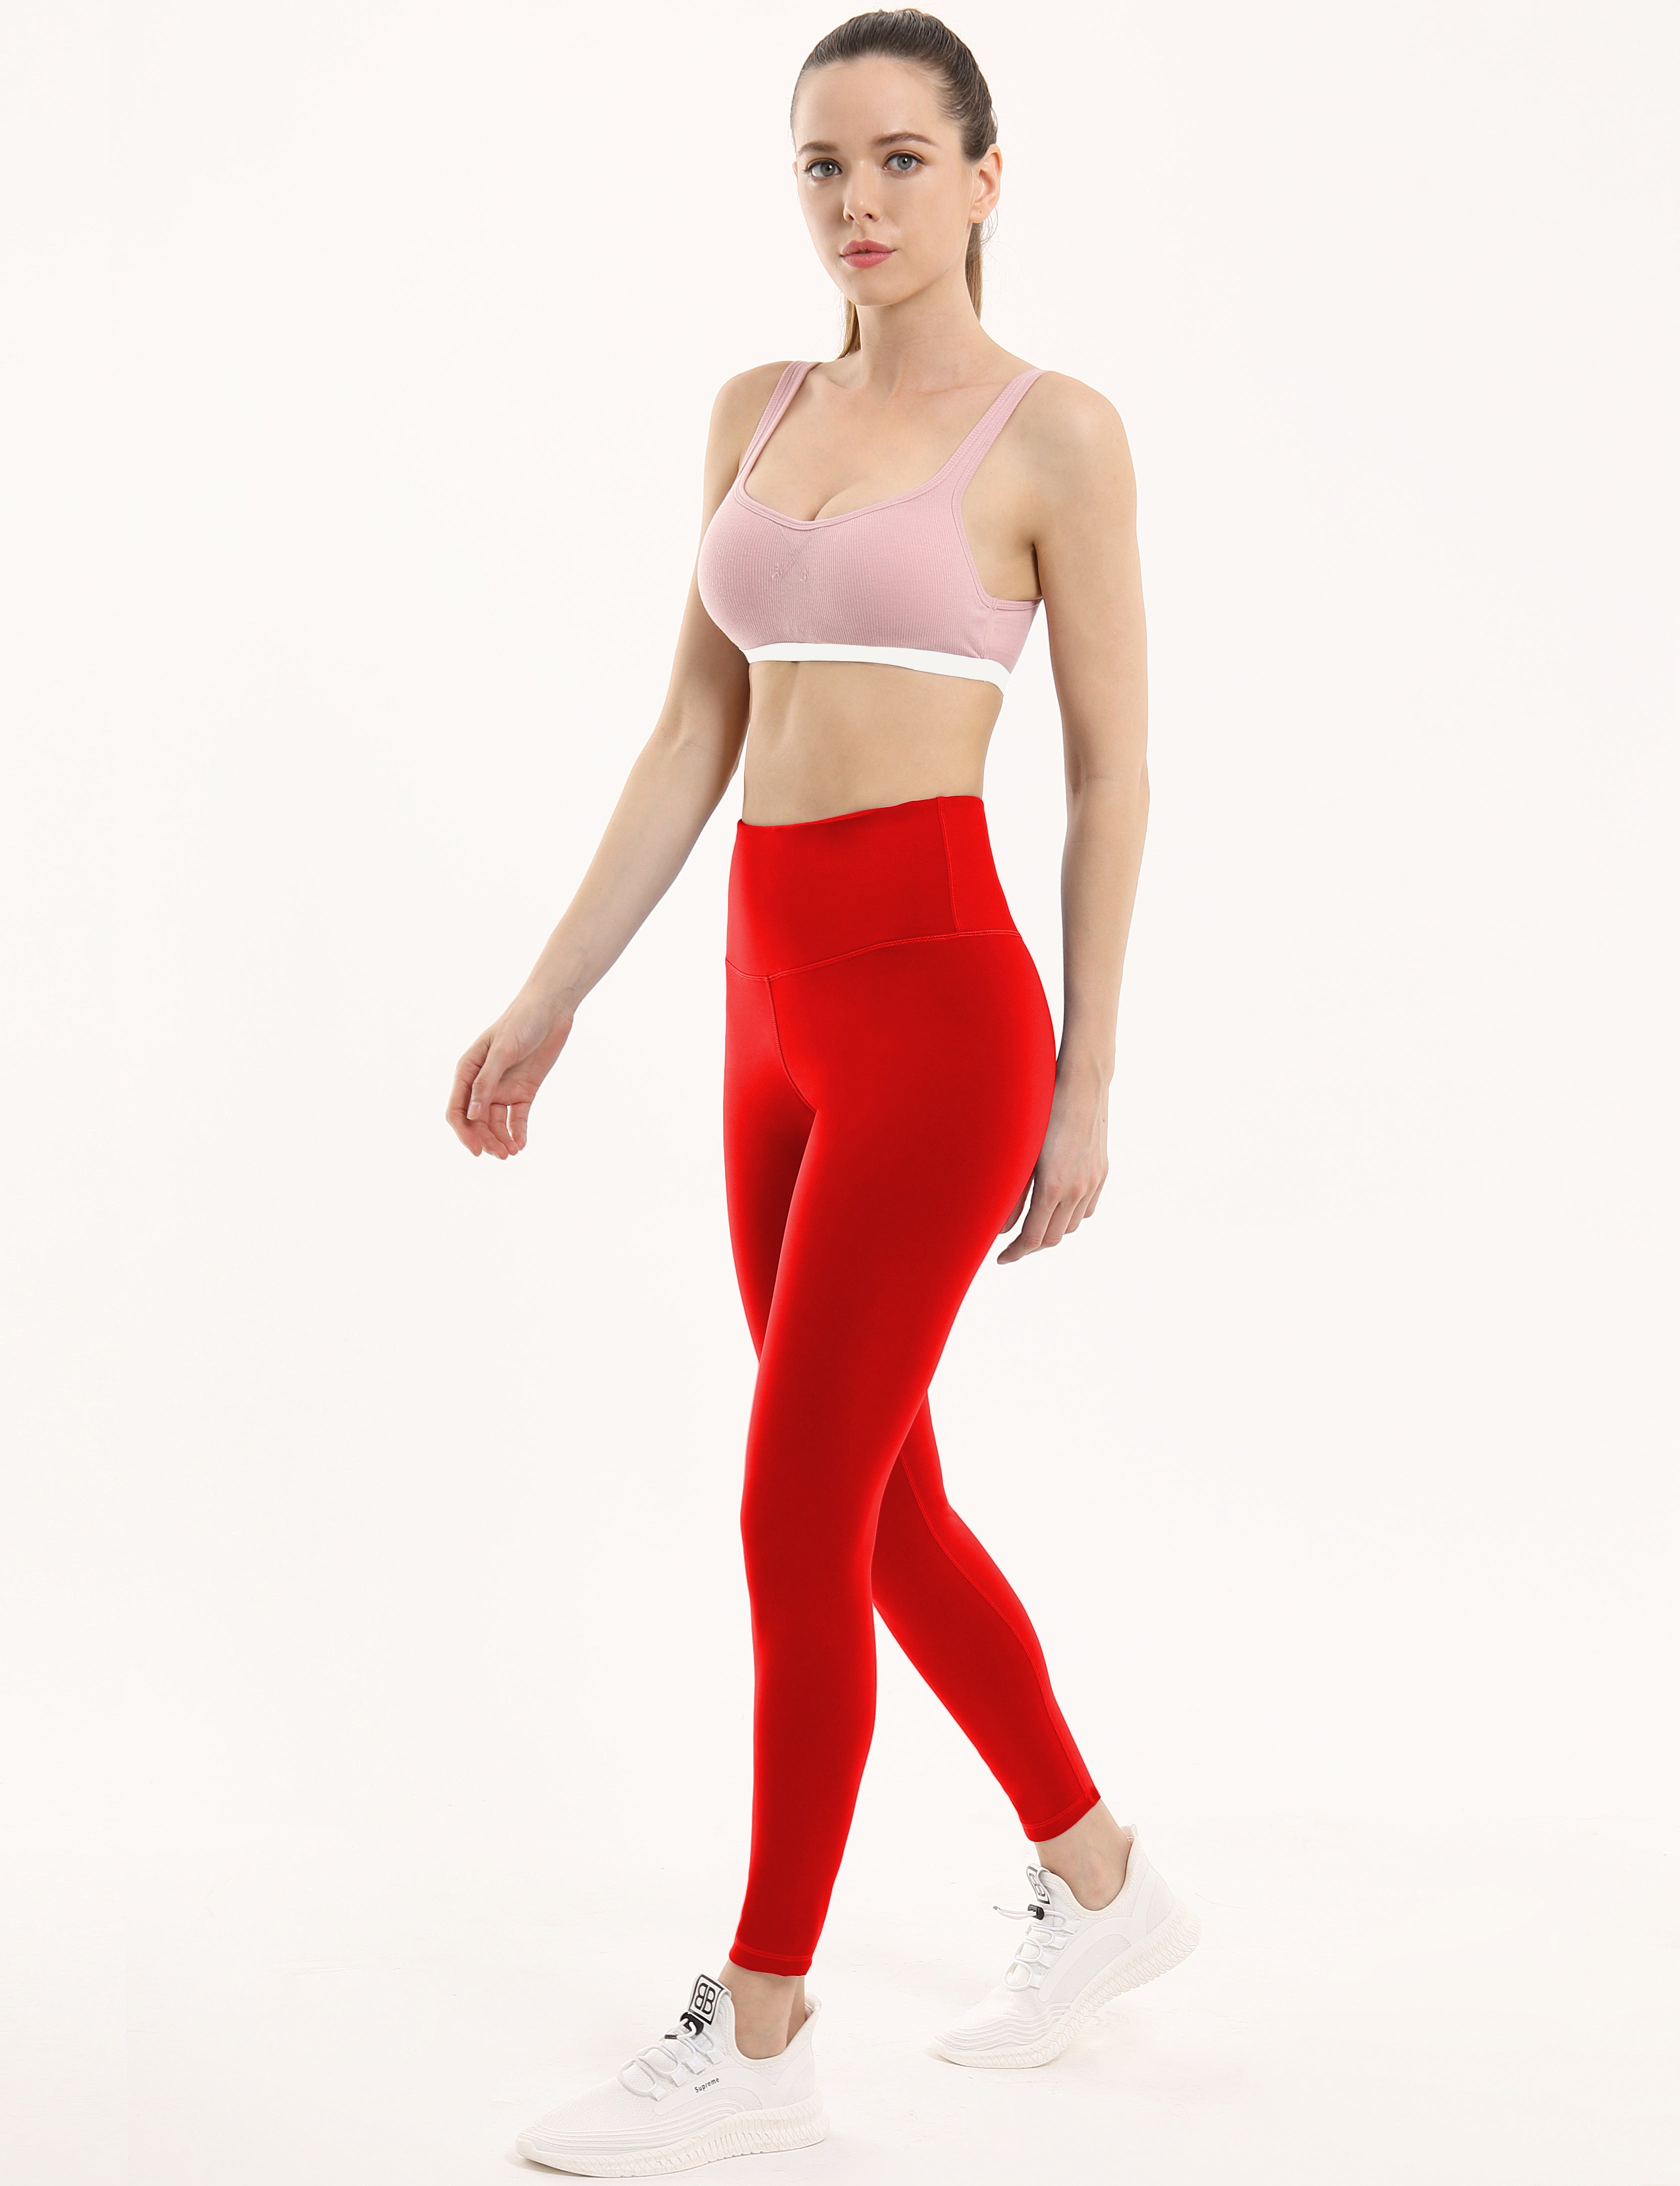 High Waist Jogging Pants scarlet 75%Nylon/25%Spandex Fabric doesn't attract lint easily 4-way stretch No see-through Moisture-wicking Tummy control Inner pocket Four lengths